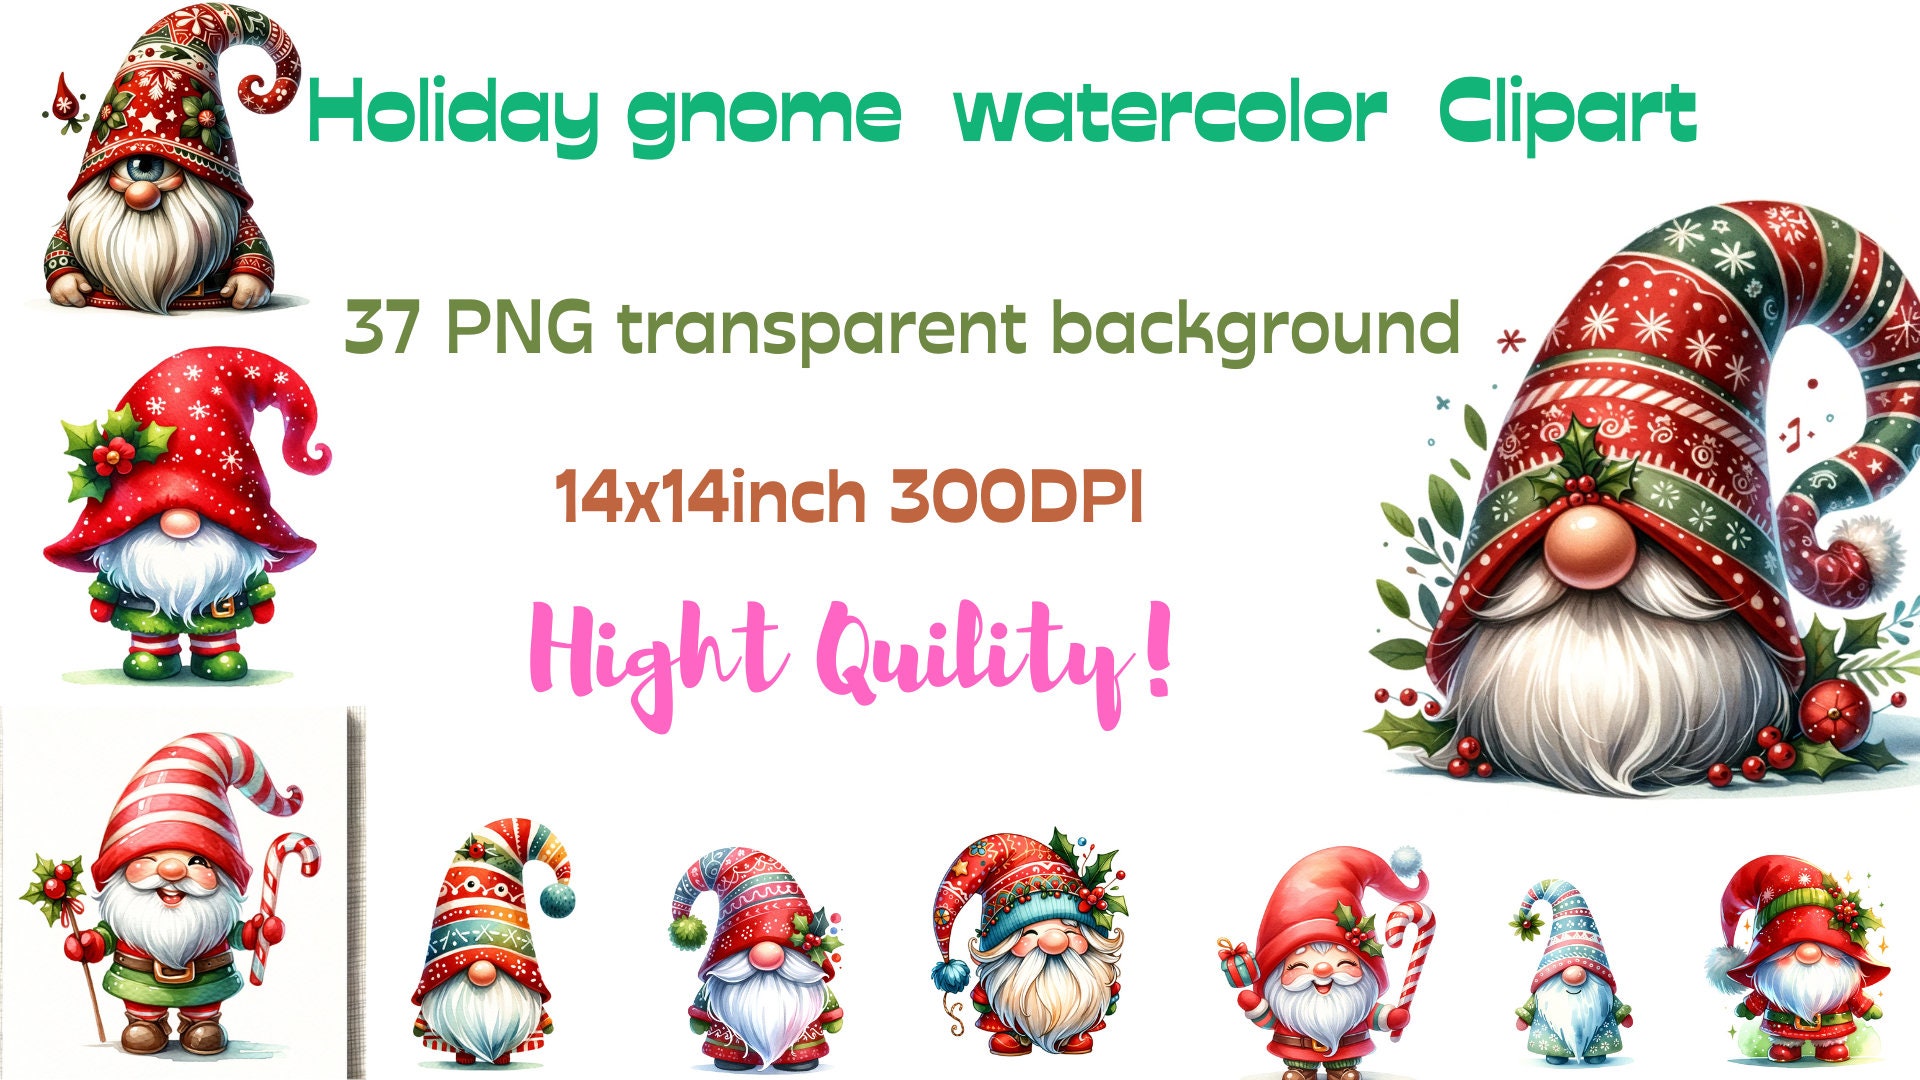 Holiday Gnome in Watercolor Clipart PNG Format 37 Holiday Gnome Pngs ...